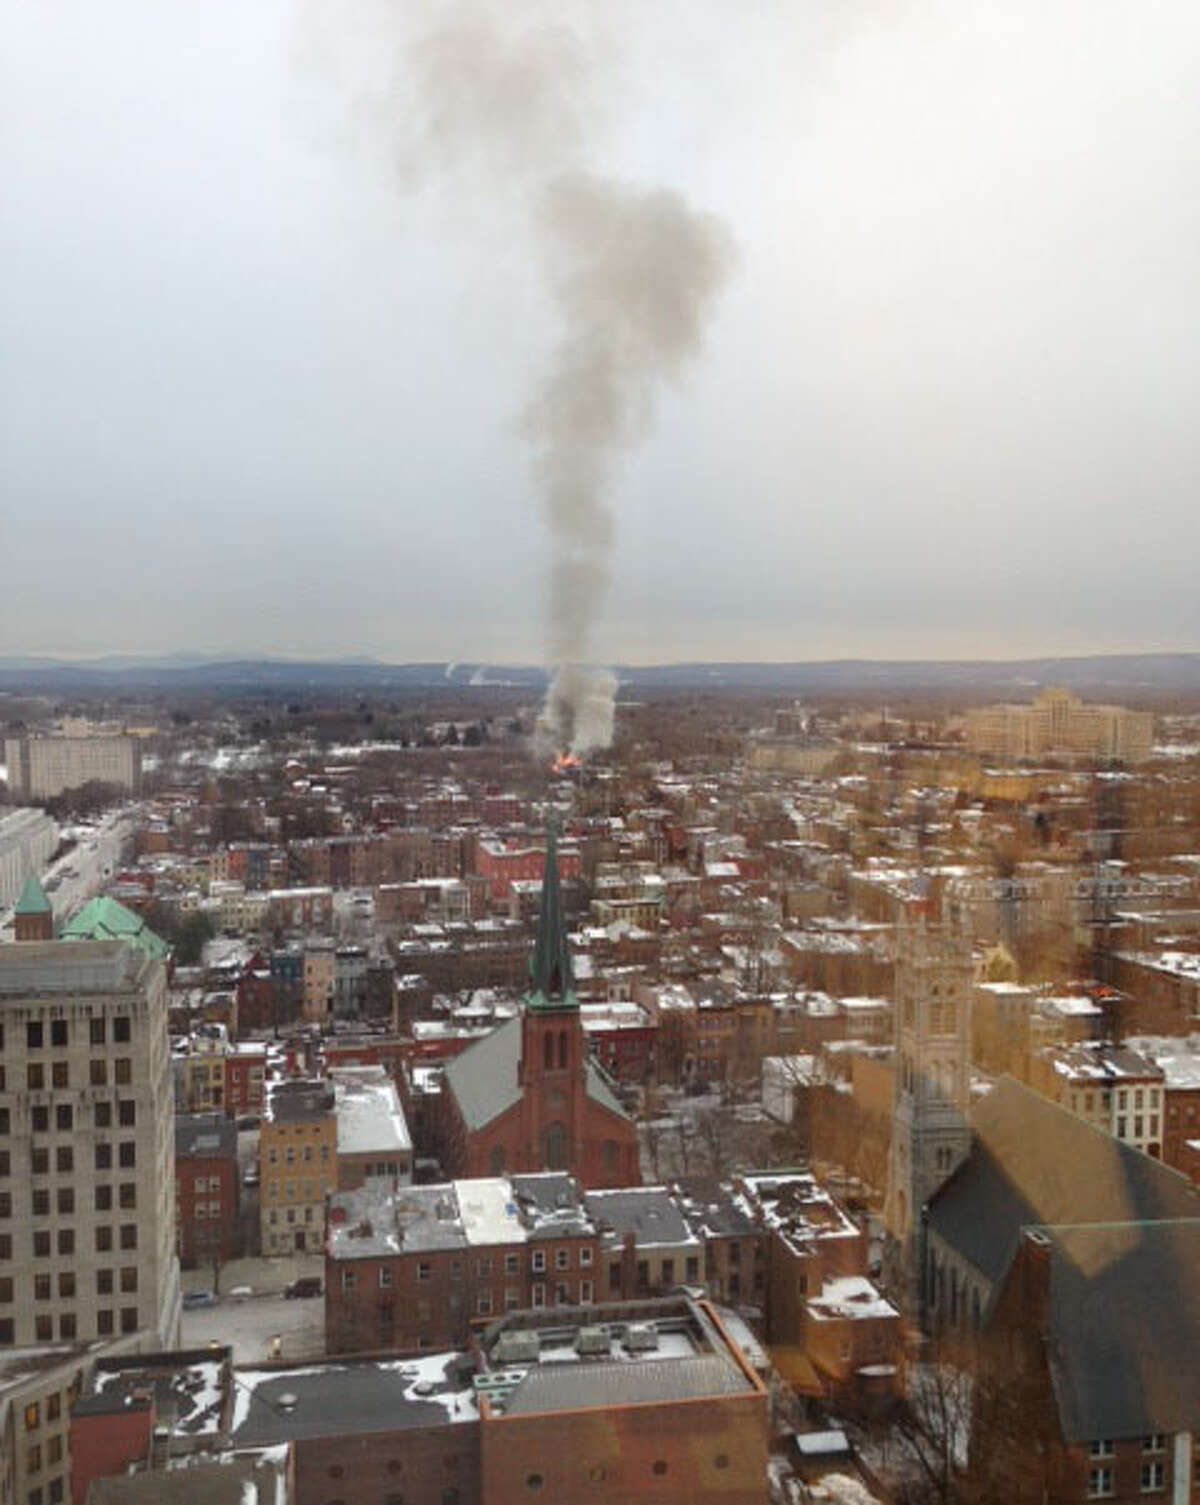 Smoke rises from the 2 alarm fire at 159 Dove Street Friday afternoon in Albany, N.Y. (Reader submitted photo)